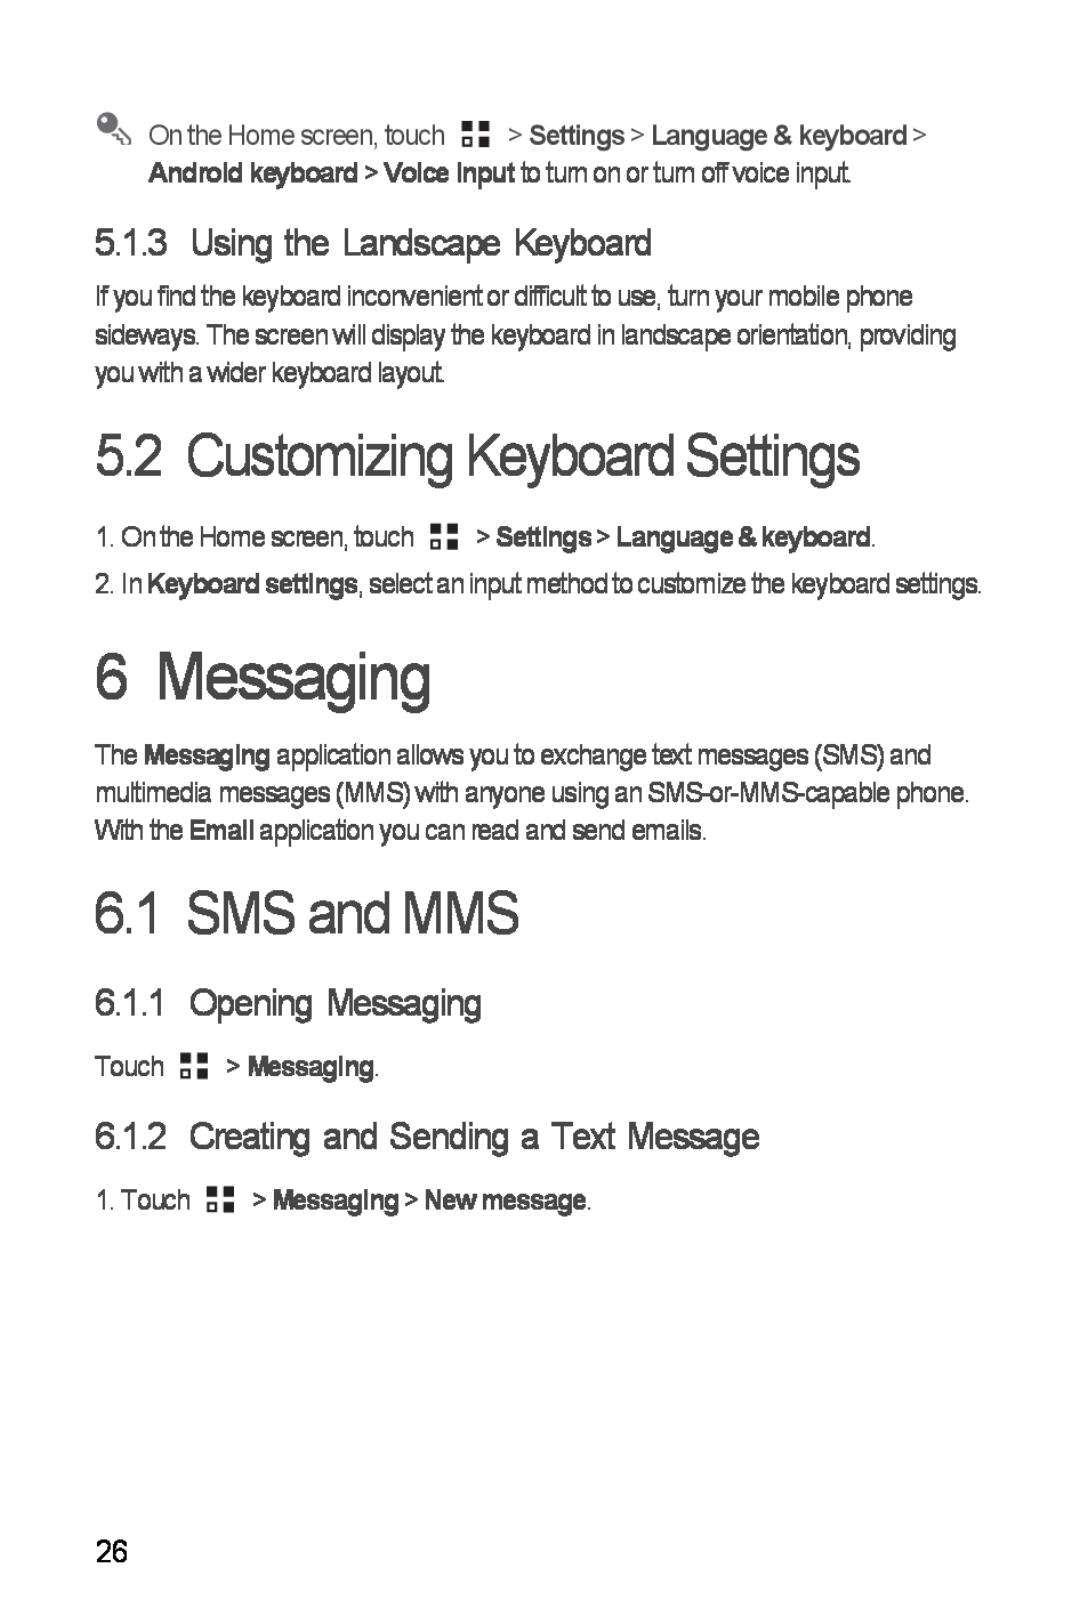 Huawei Ascend Y manual Customizing Keyboard Settings, SMS and MMS, Using the Landscape Keyboard, Opening Messaging 